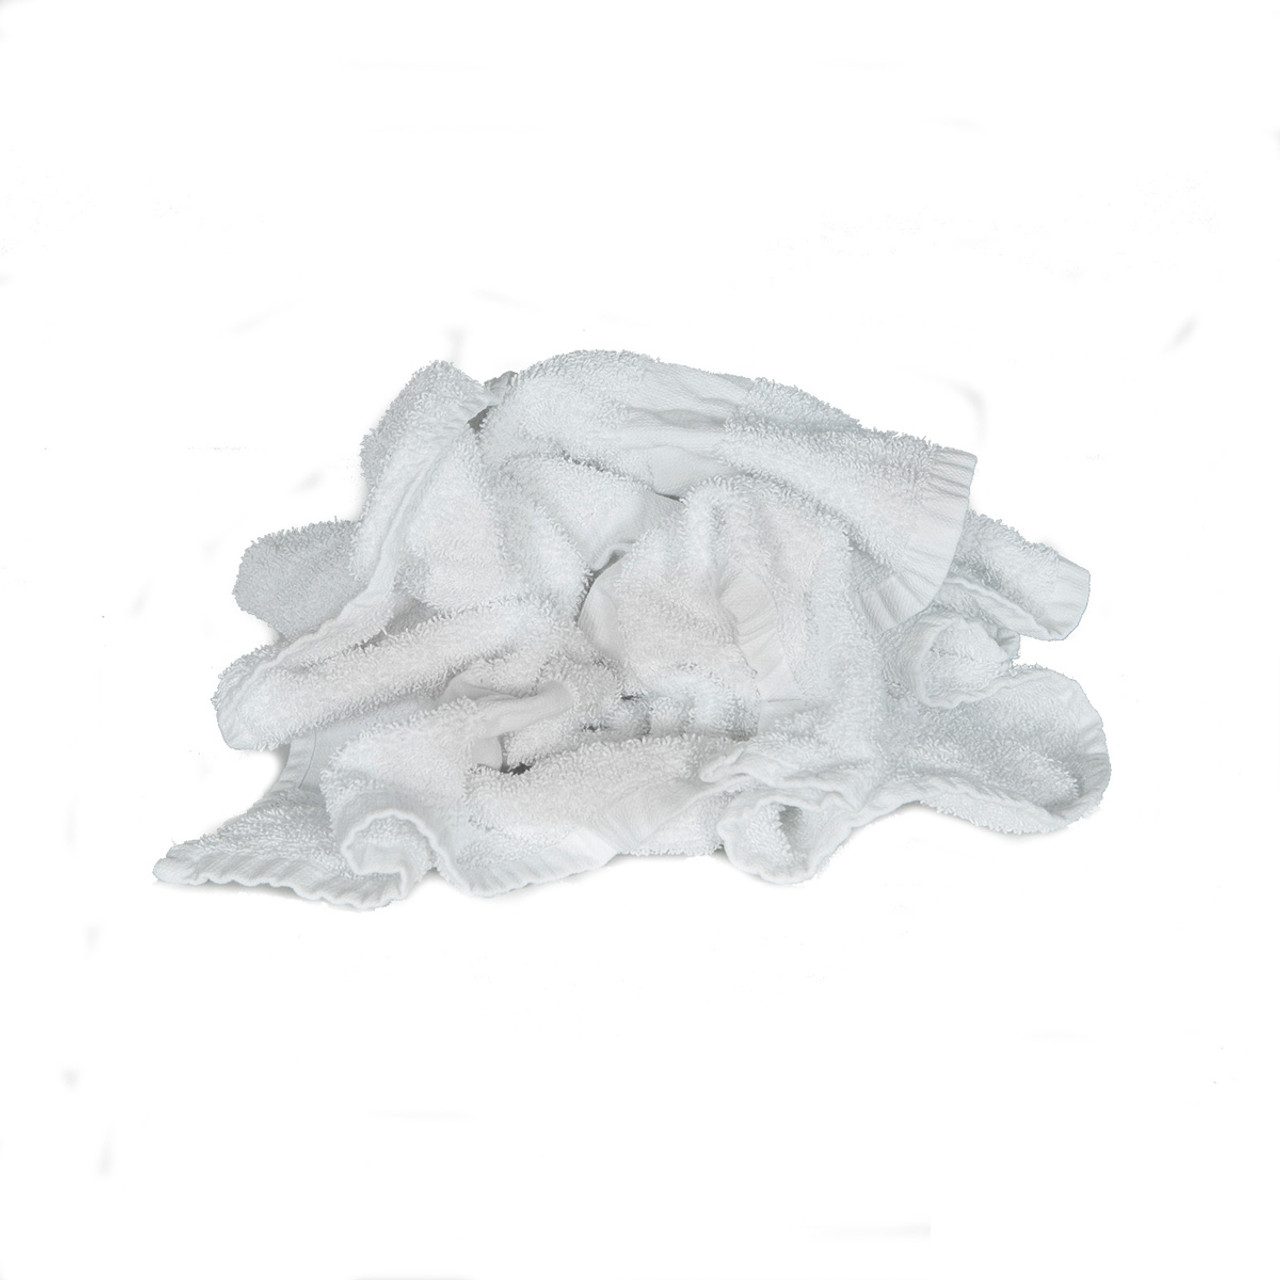 https://cdn11.bigcommerce.com/s-a5uwe4c7wz/images/stencil/1280x1280/products/617/1731/Towel-Rags-Large-Pieces-Bulk-Recycled-White-1-Towel__04349.1587138337.jpg?c=1